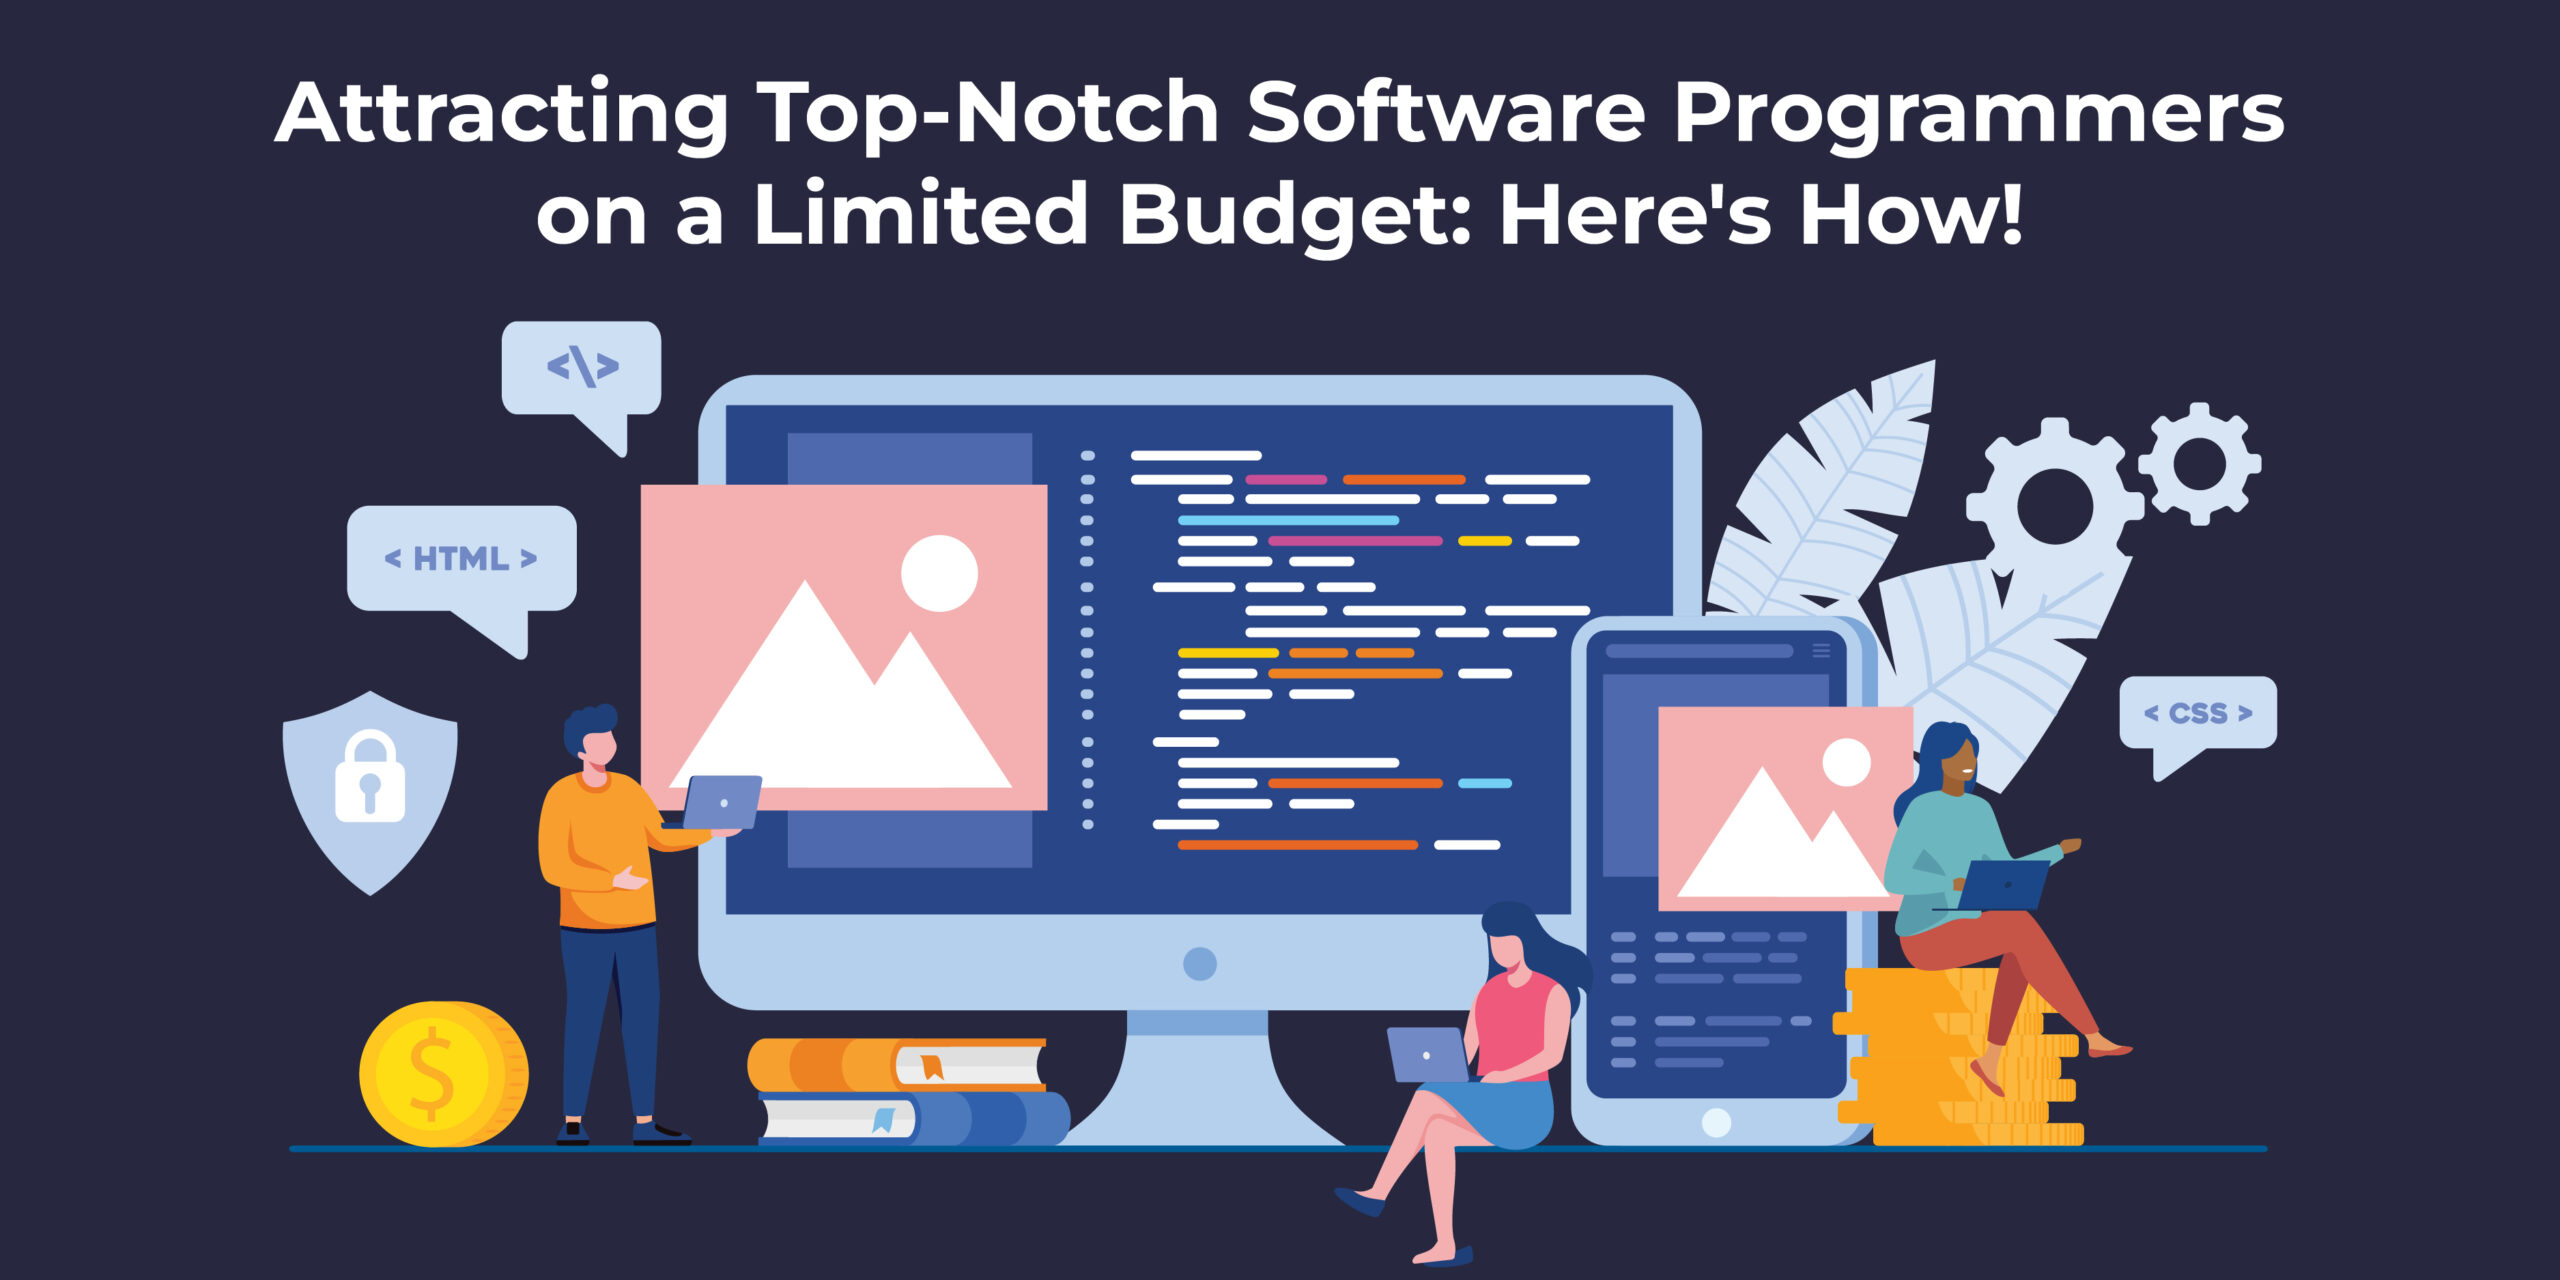 Attracting Top-Notch Software Programmers on a Limited Budget: Here’s How!